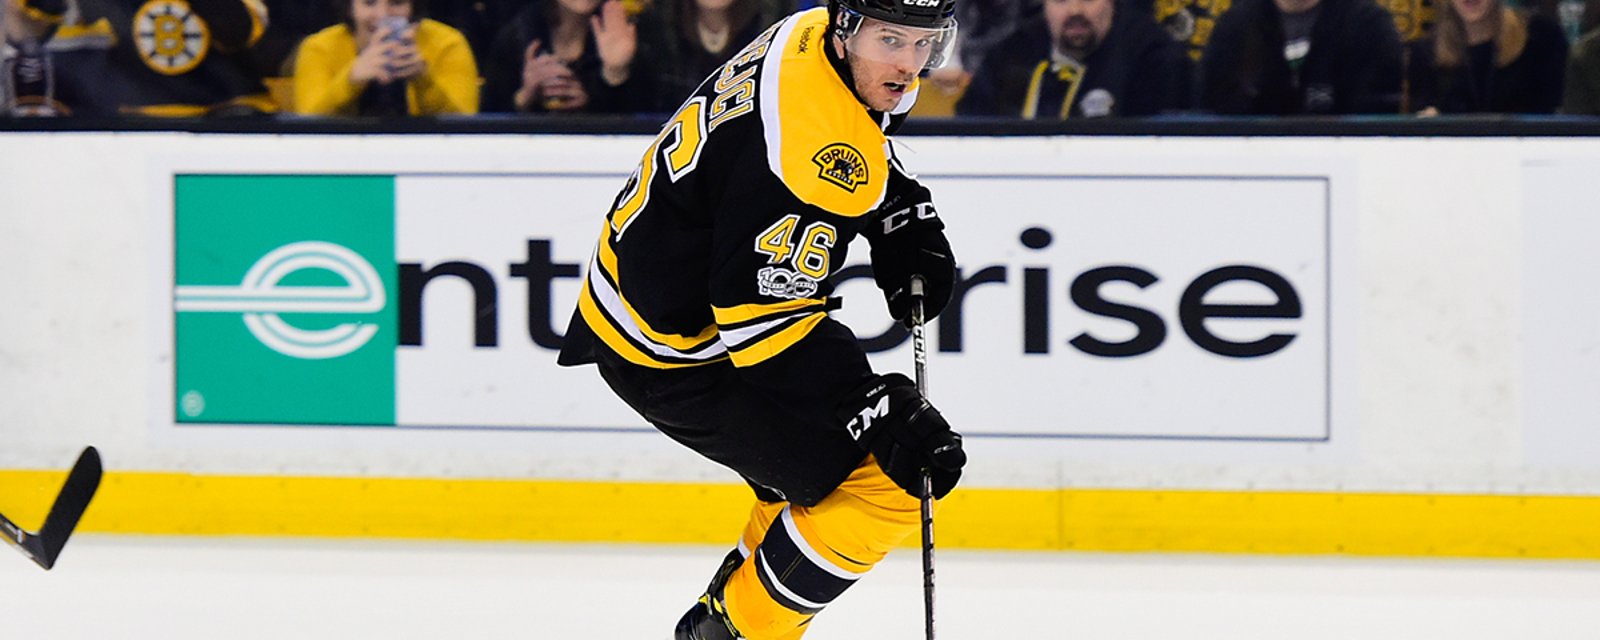 Injury Report: Promising signs for Krejci